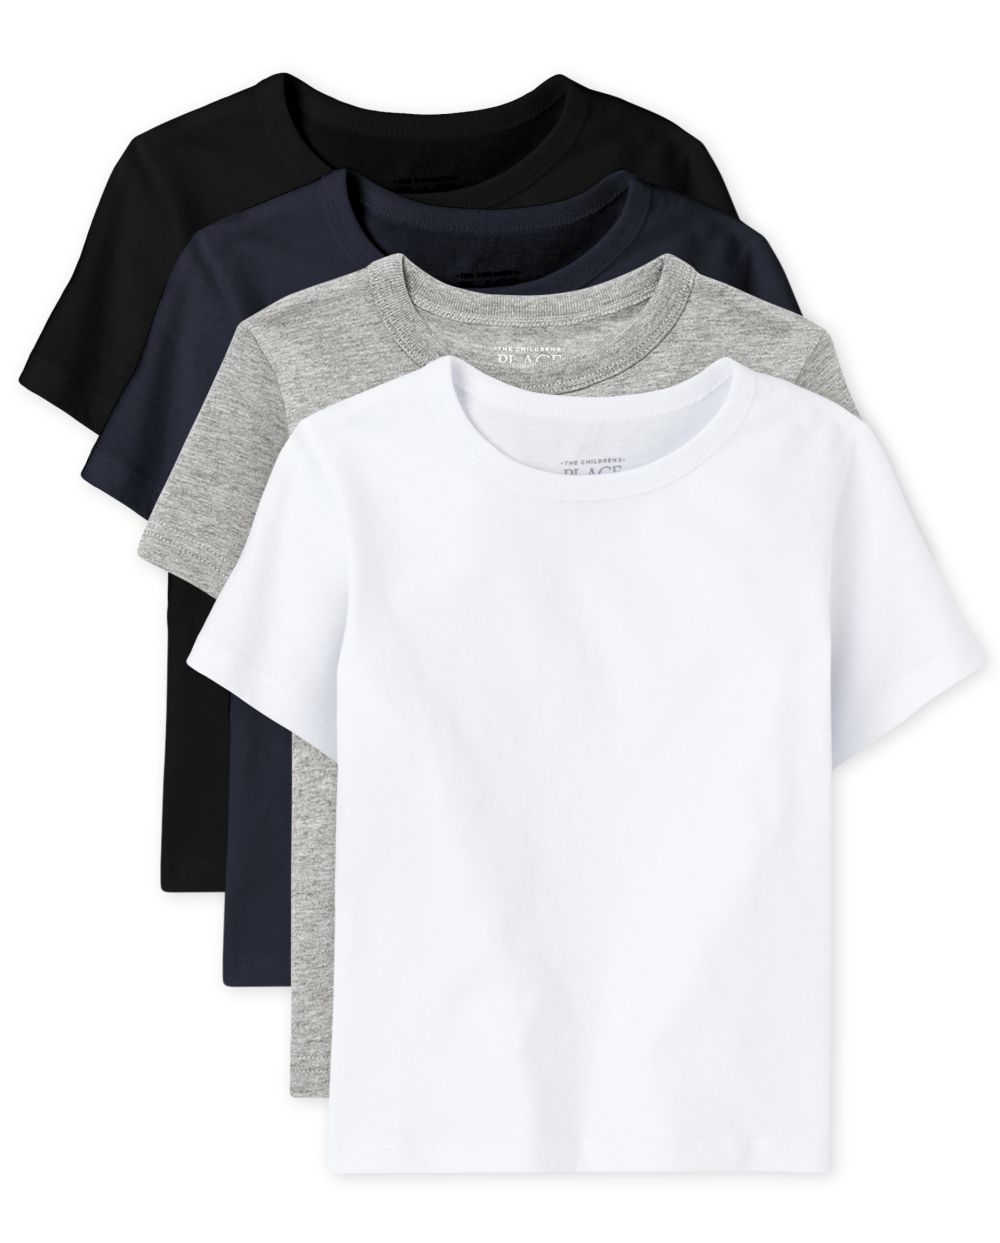 Baby And Toddler Boys Short Sleeve Top 4-Pack